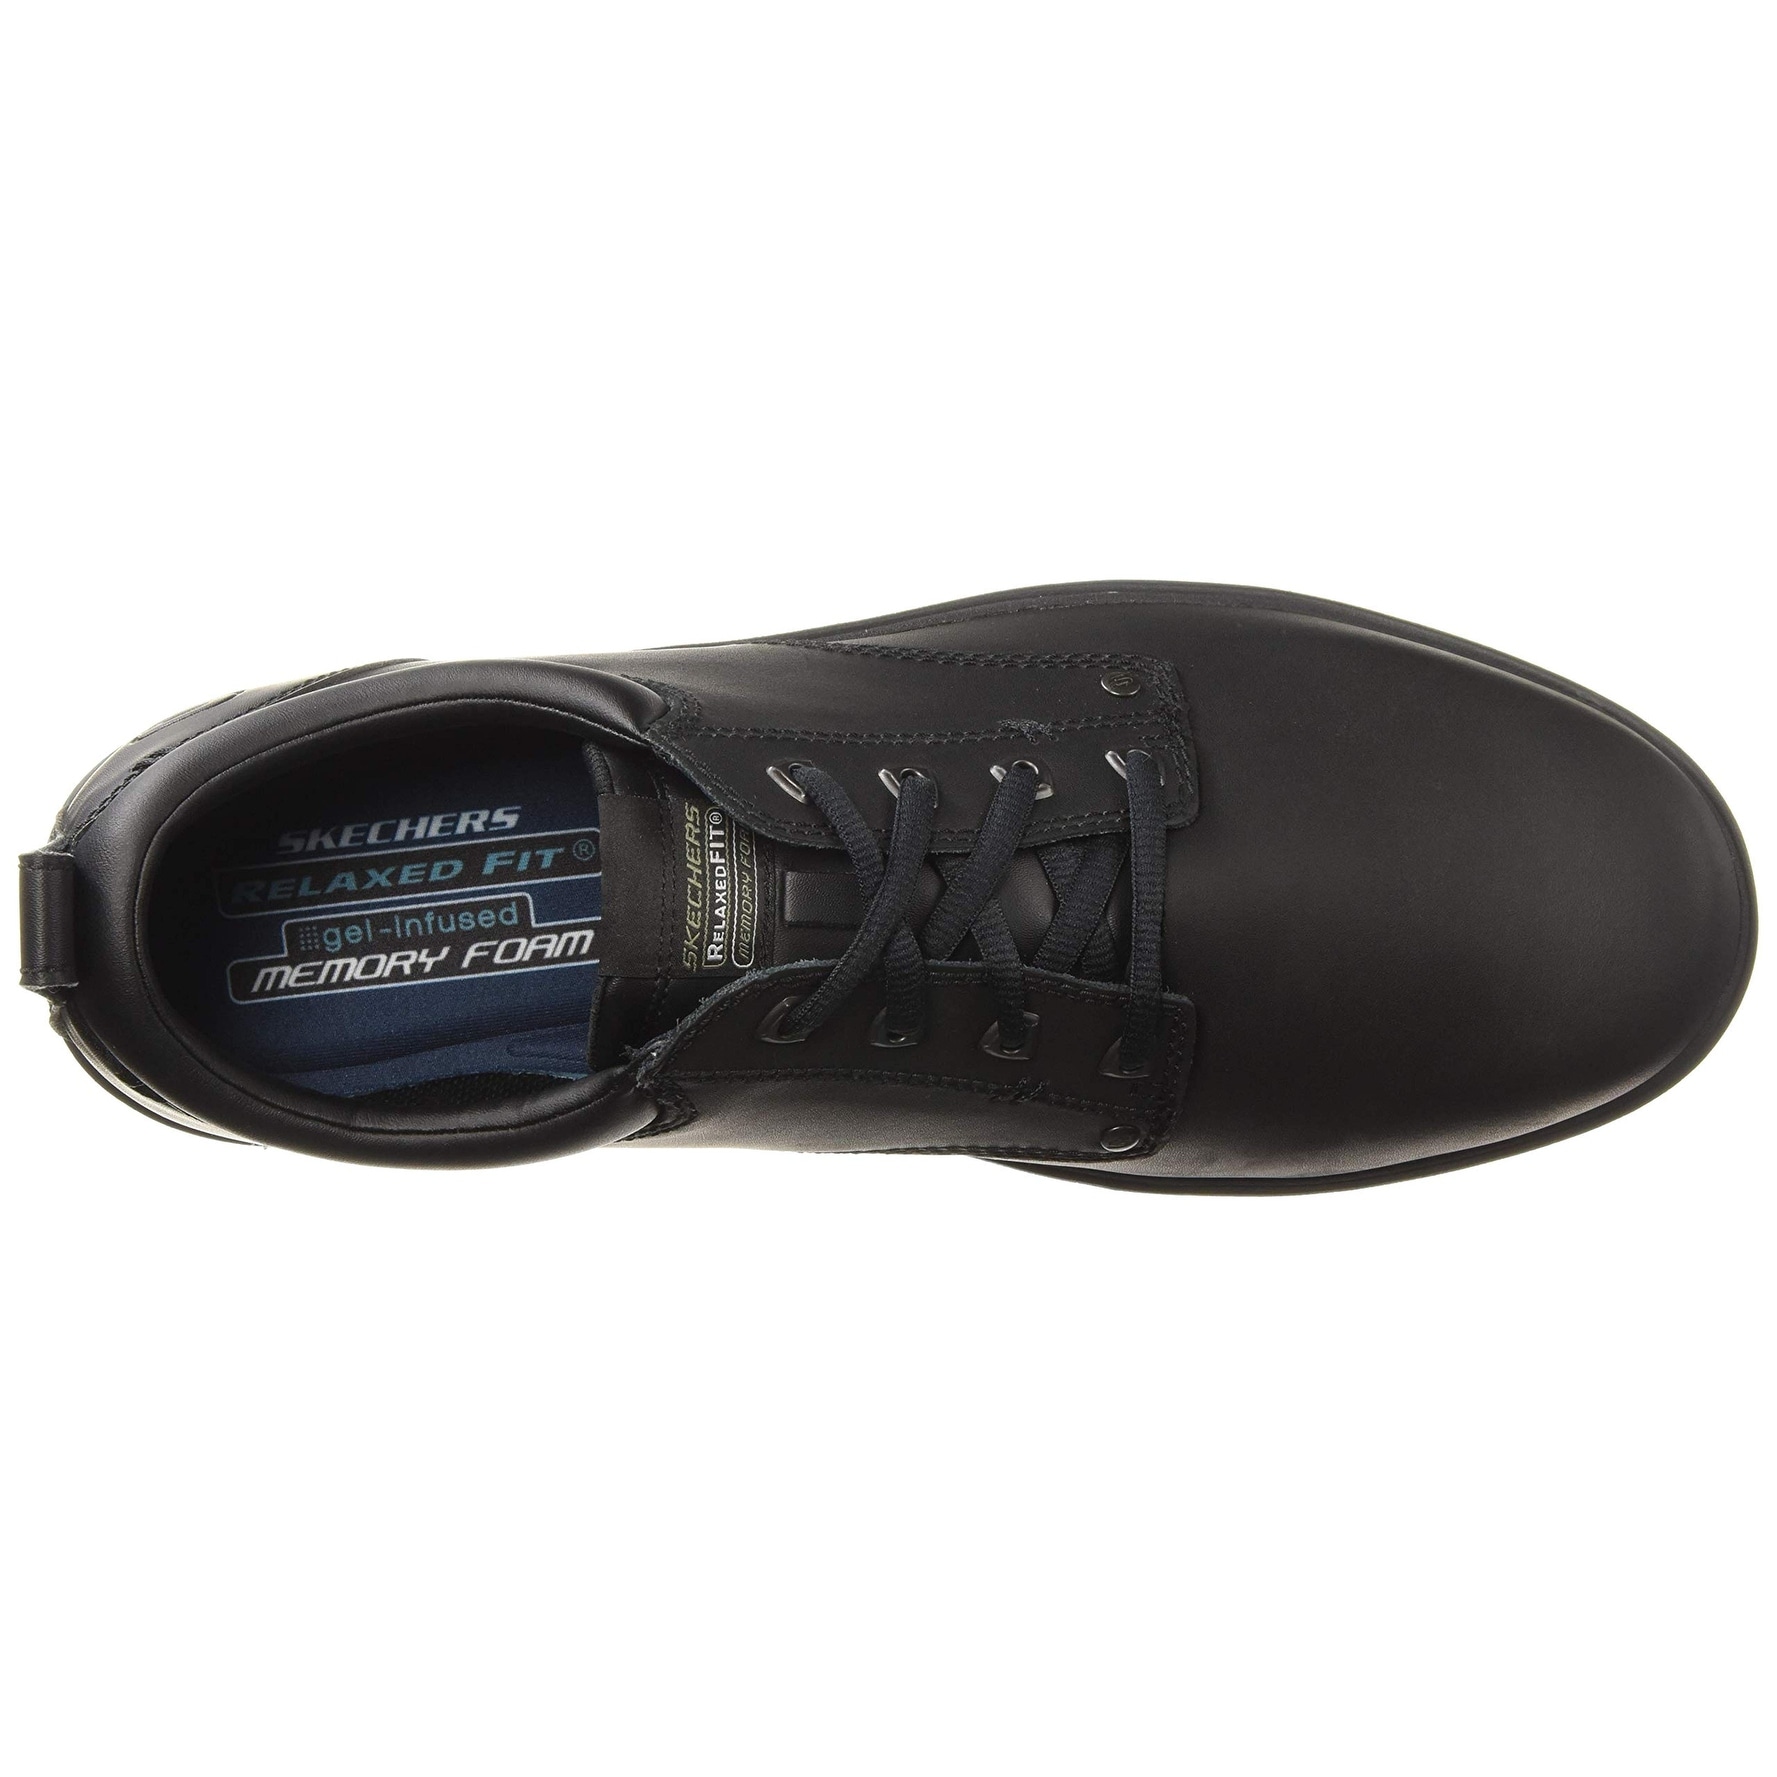 skechers tom cats mens shoes